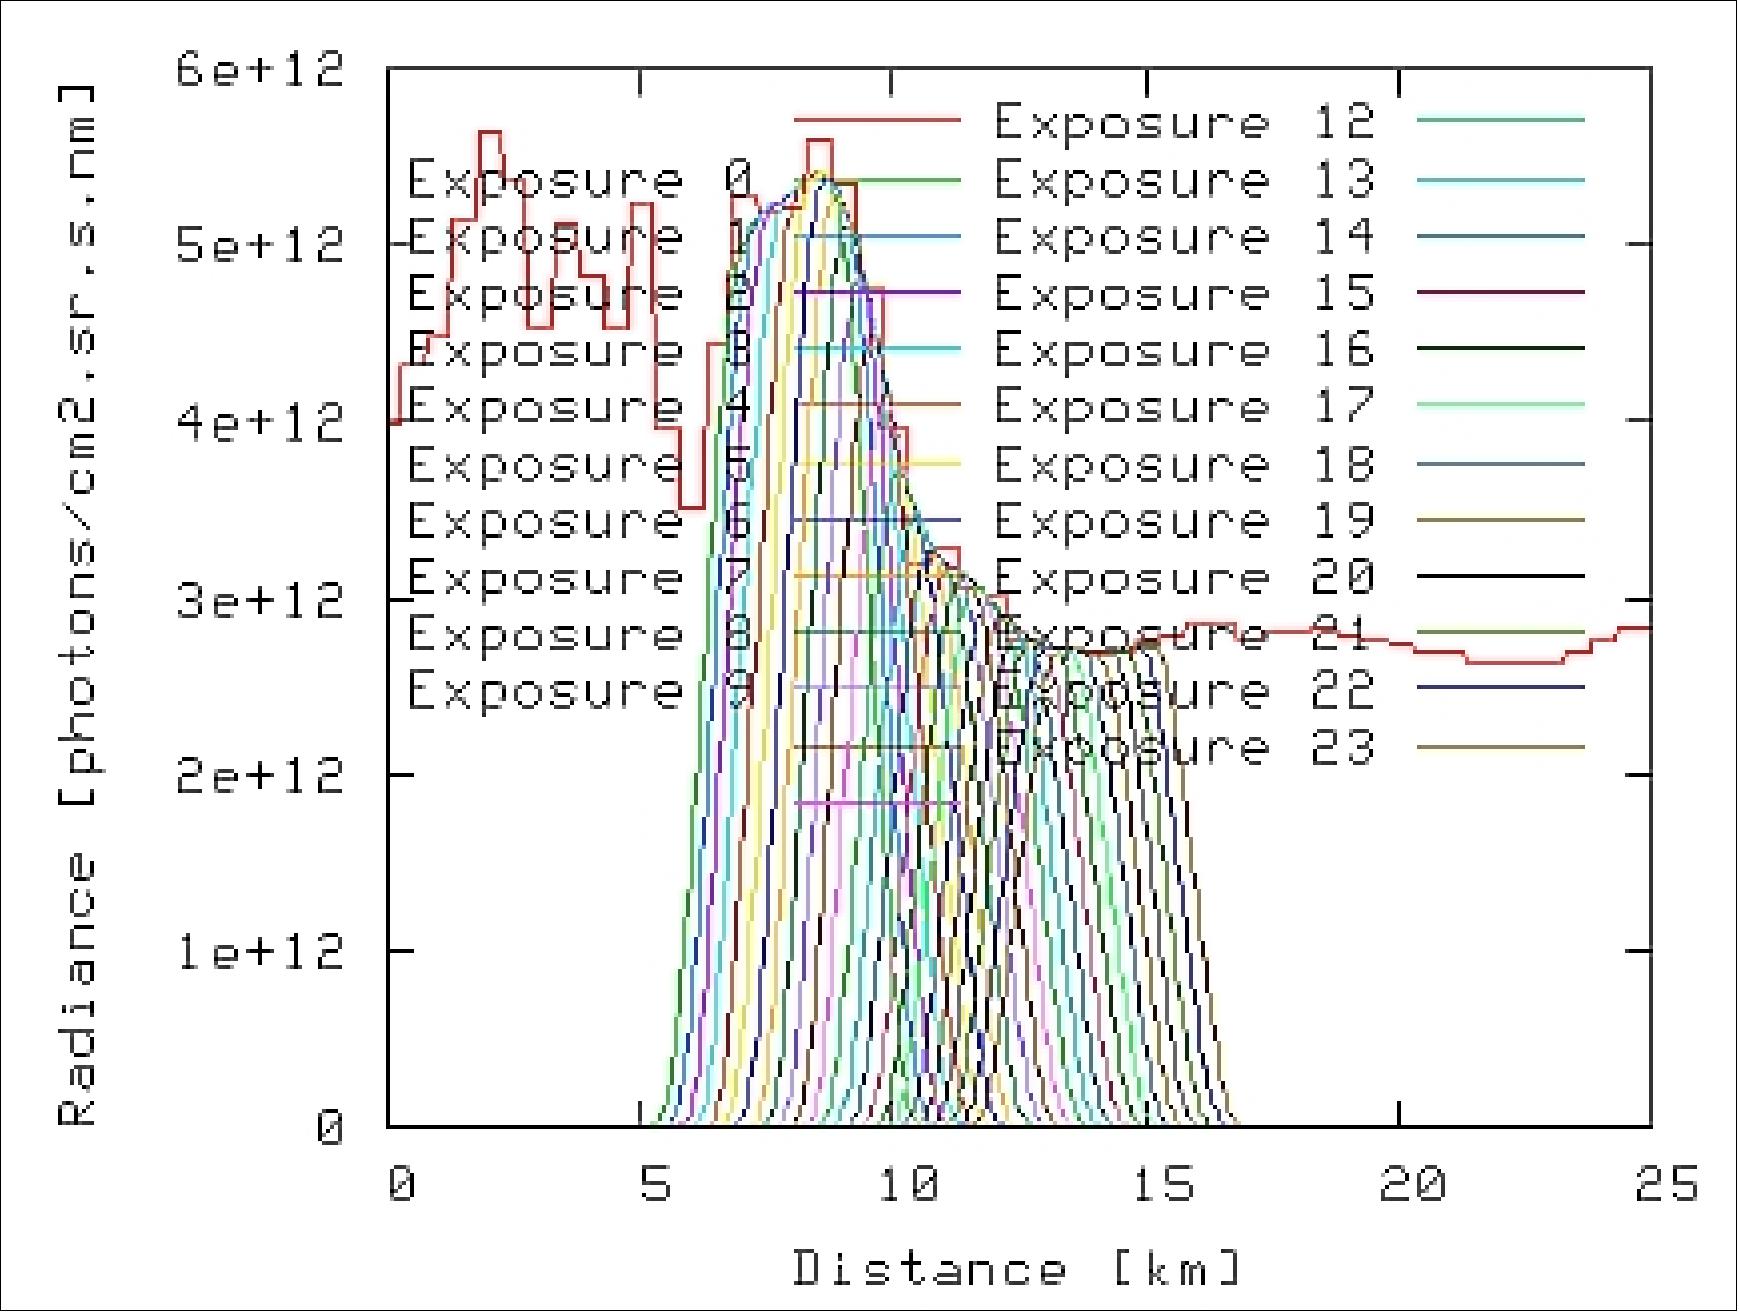 Figure 109: Staring observation of a heterogeneous scene for the UVIS band at 500 nm; the different curves are for the different exposures where the satellite has moved (image credit: SRON, TNO)